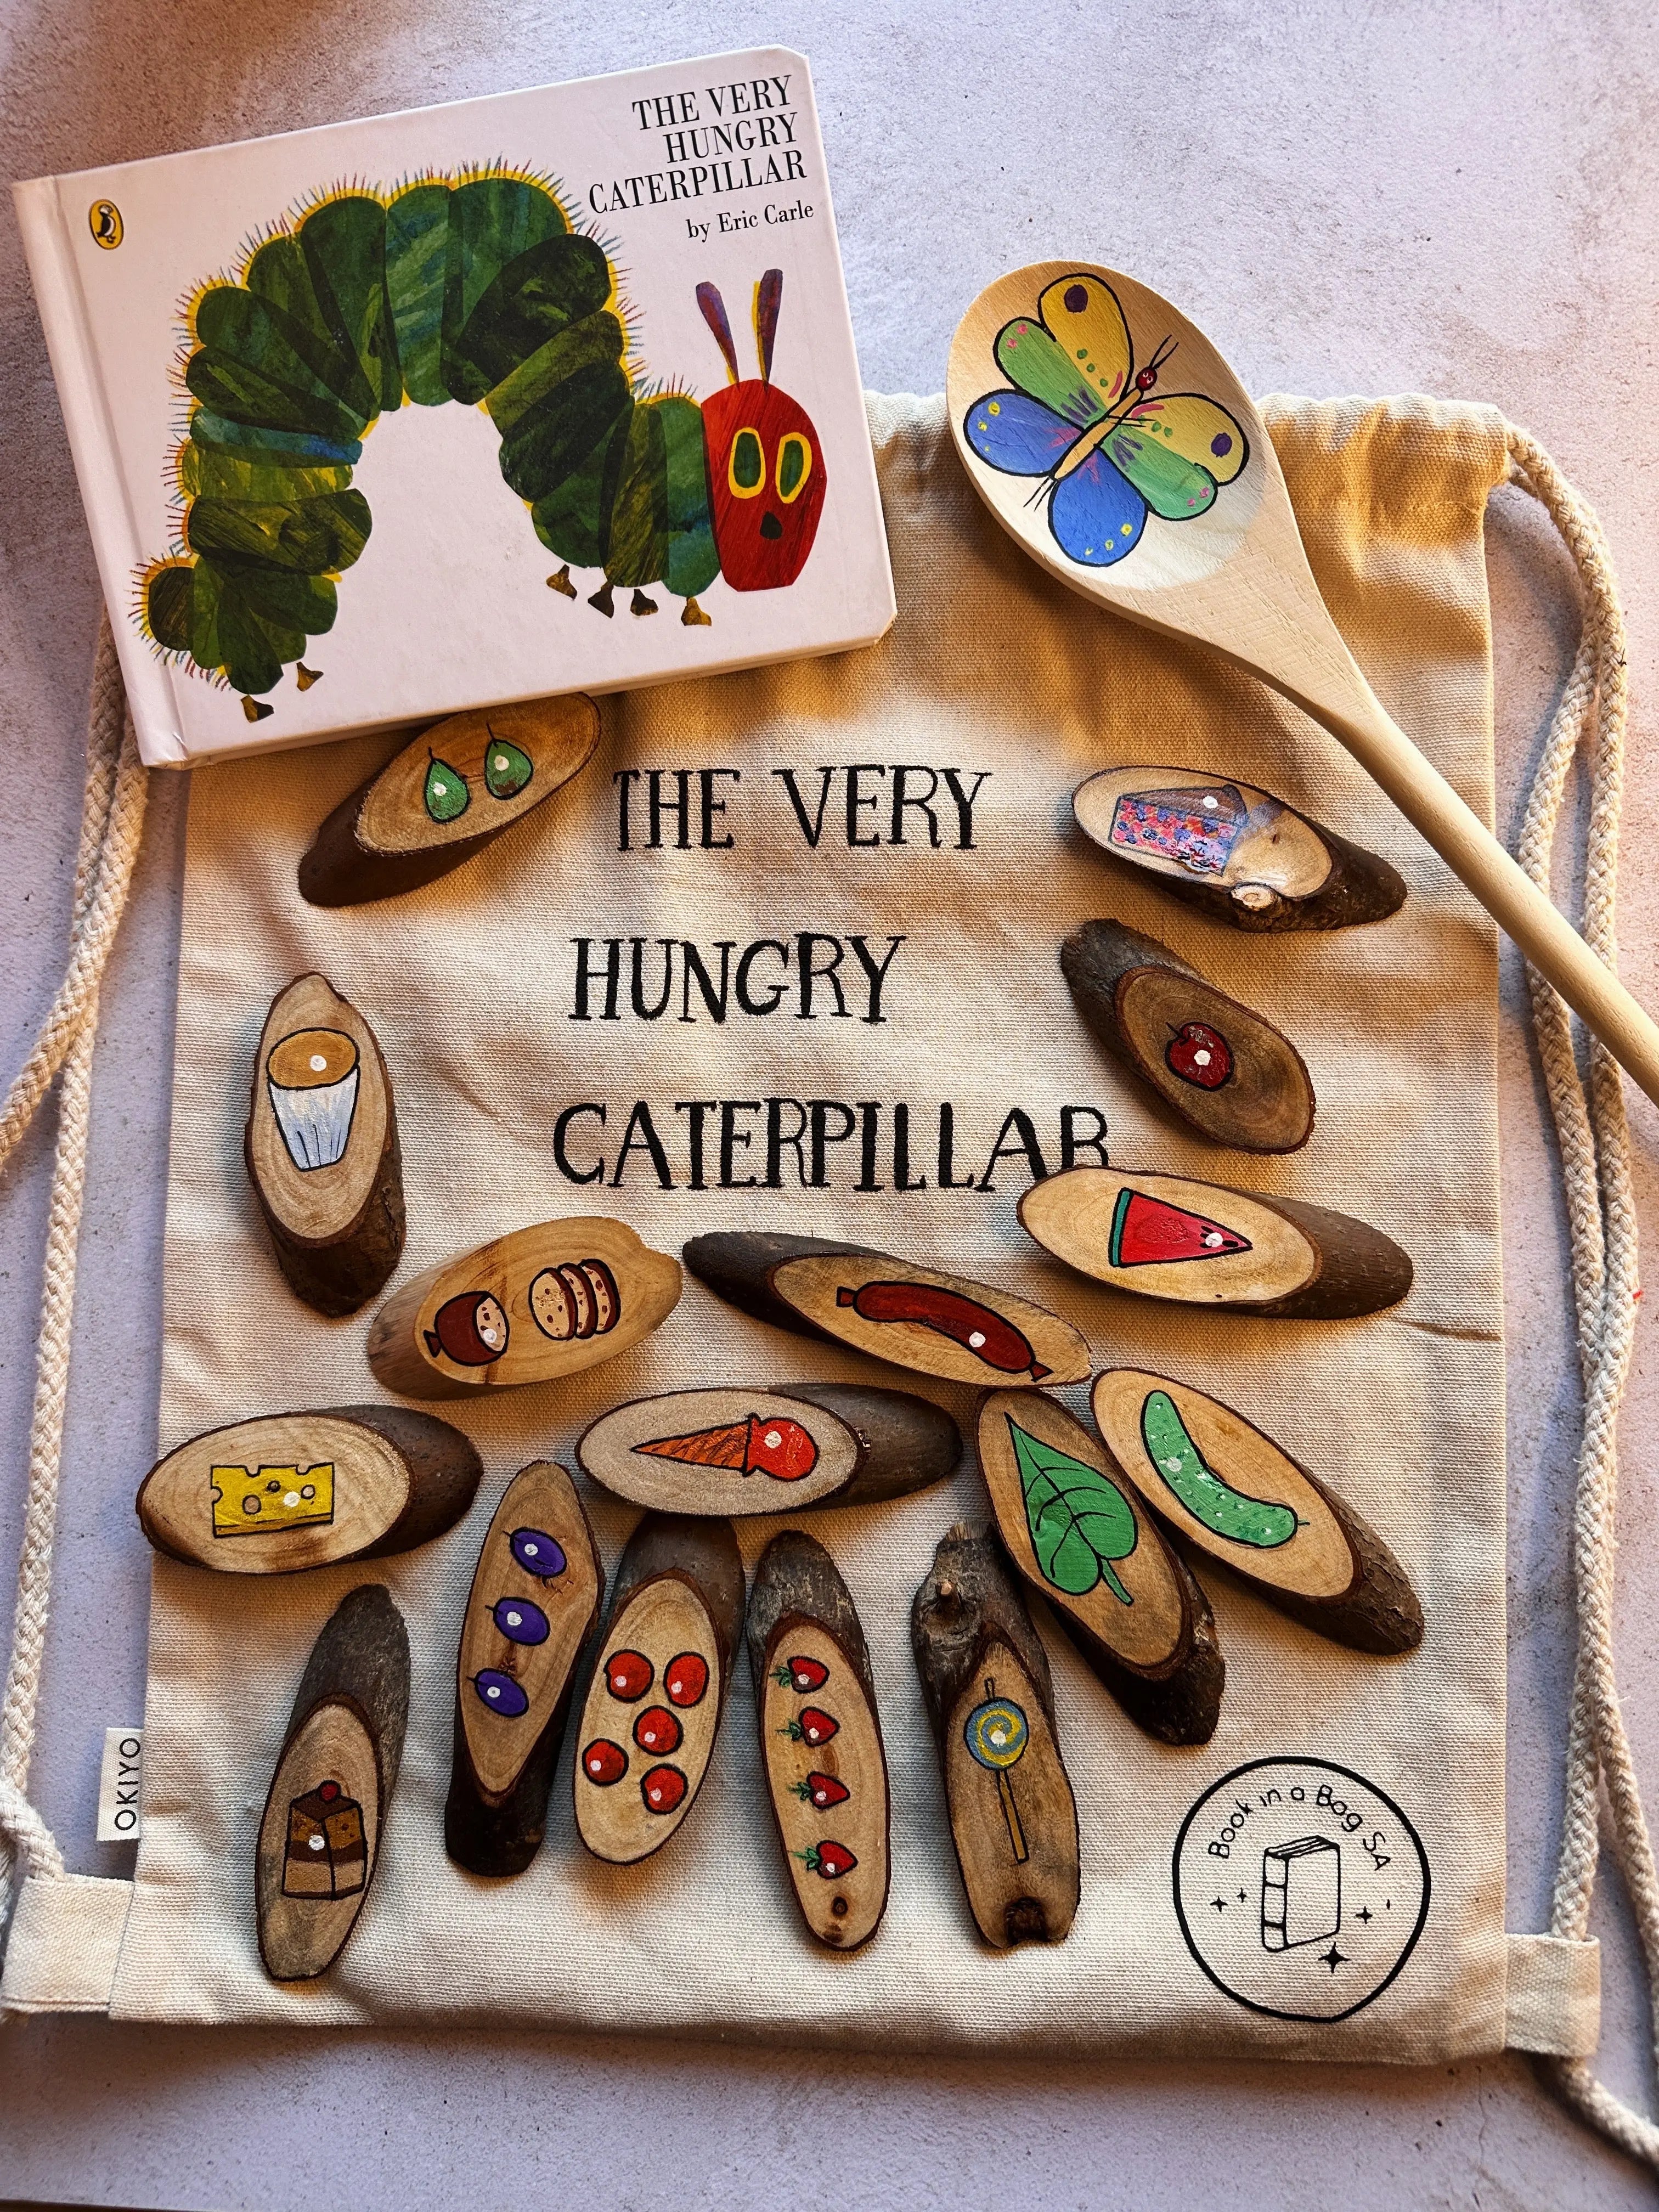 Book in a bag - The Very Hungry Caterpillar Book in a bag